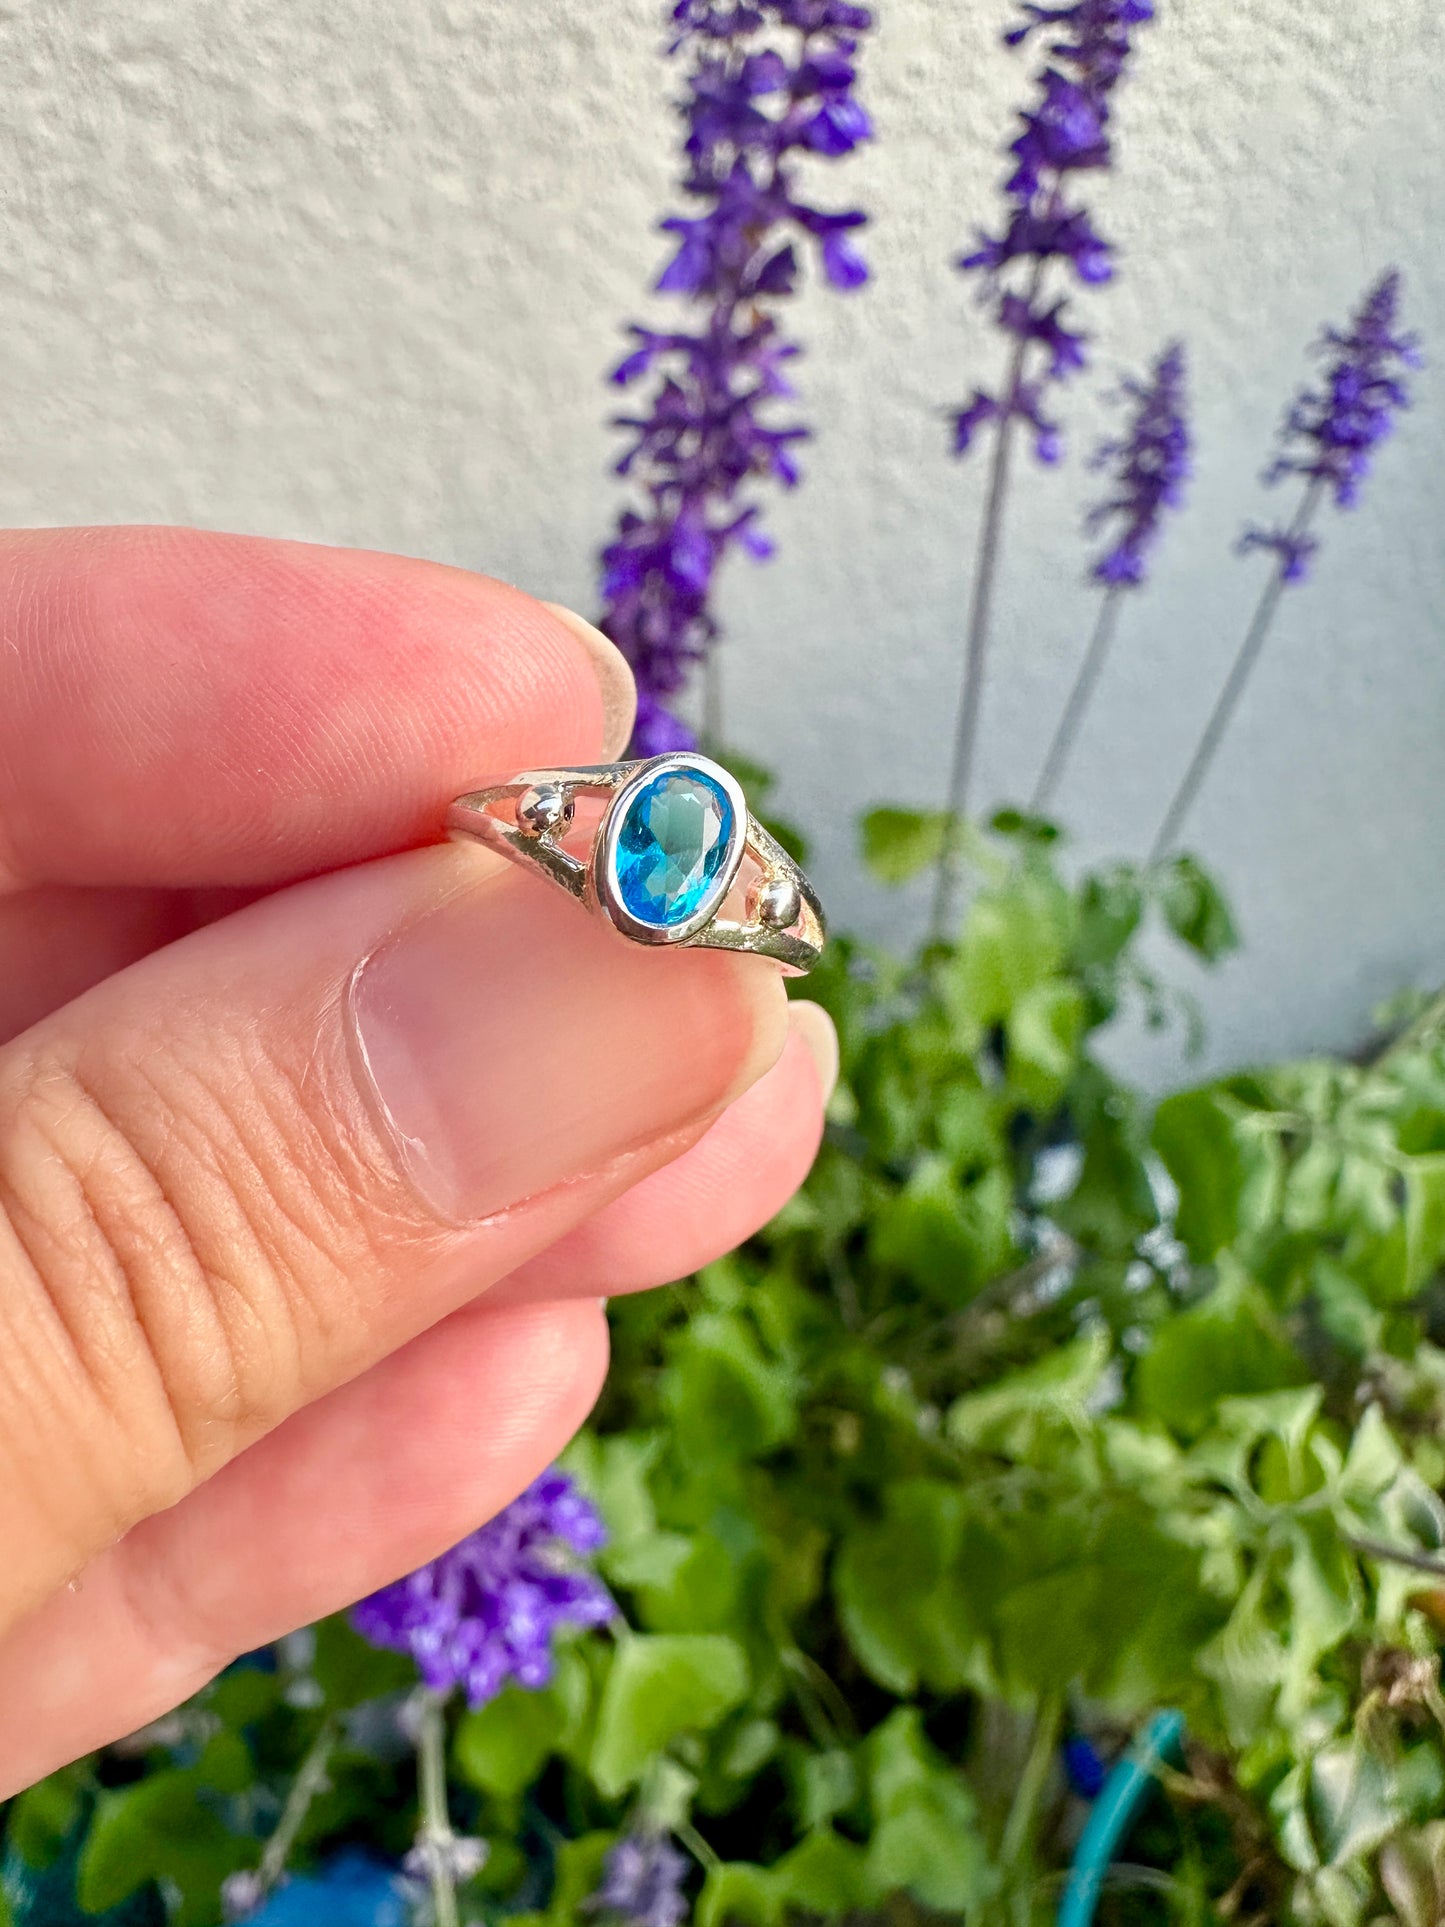 Blue Topaz Sterling Silver Ring Size 4 - Vibrant Gemstone Jewelry for Girls, Elegant Design, Perfect Gift for Special Occasions